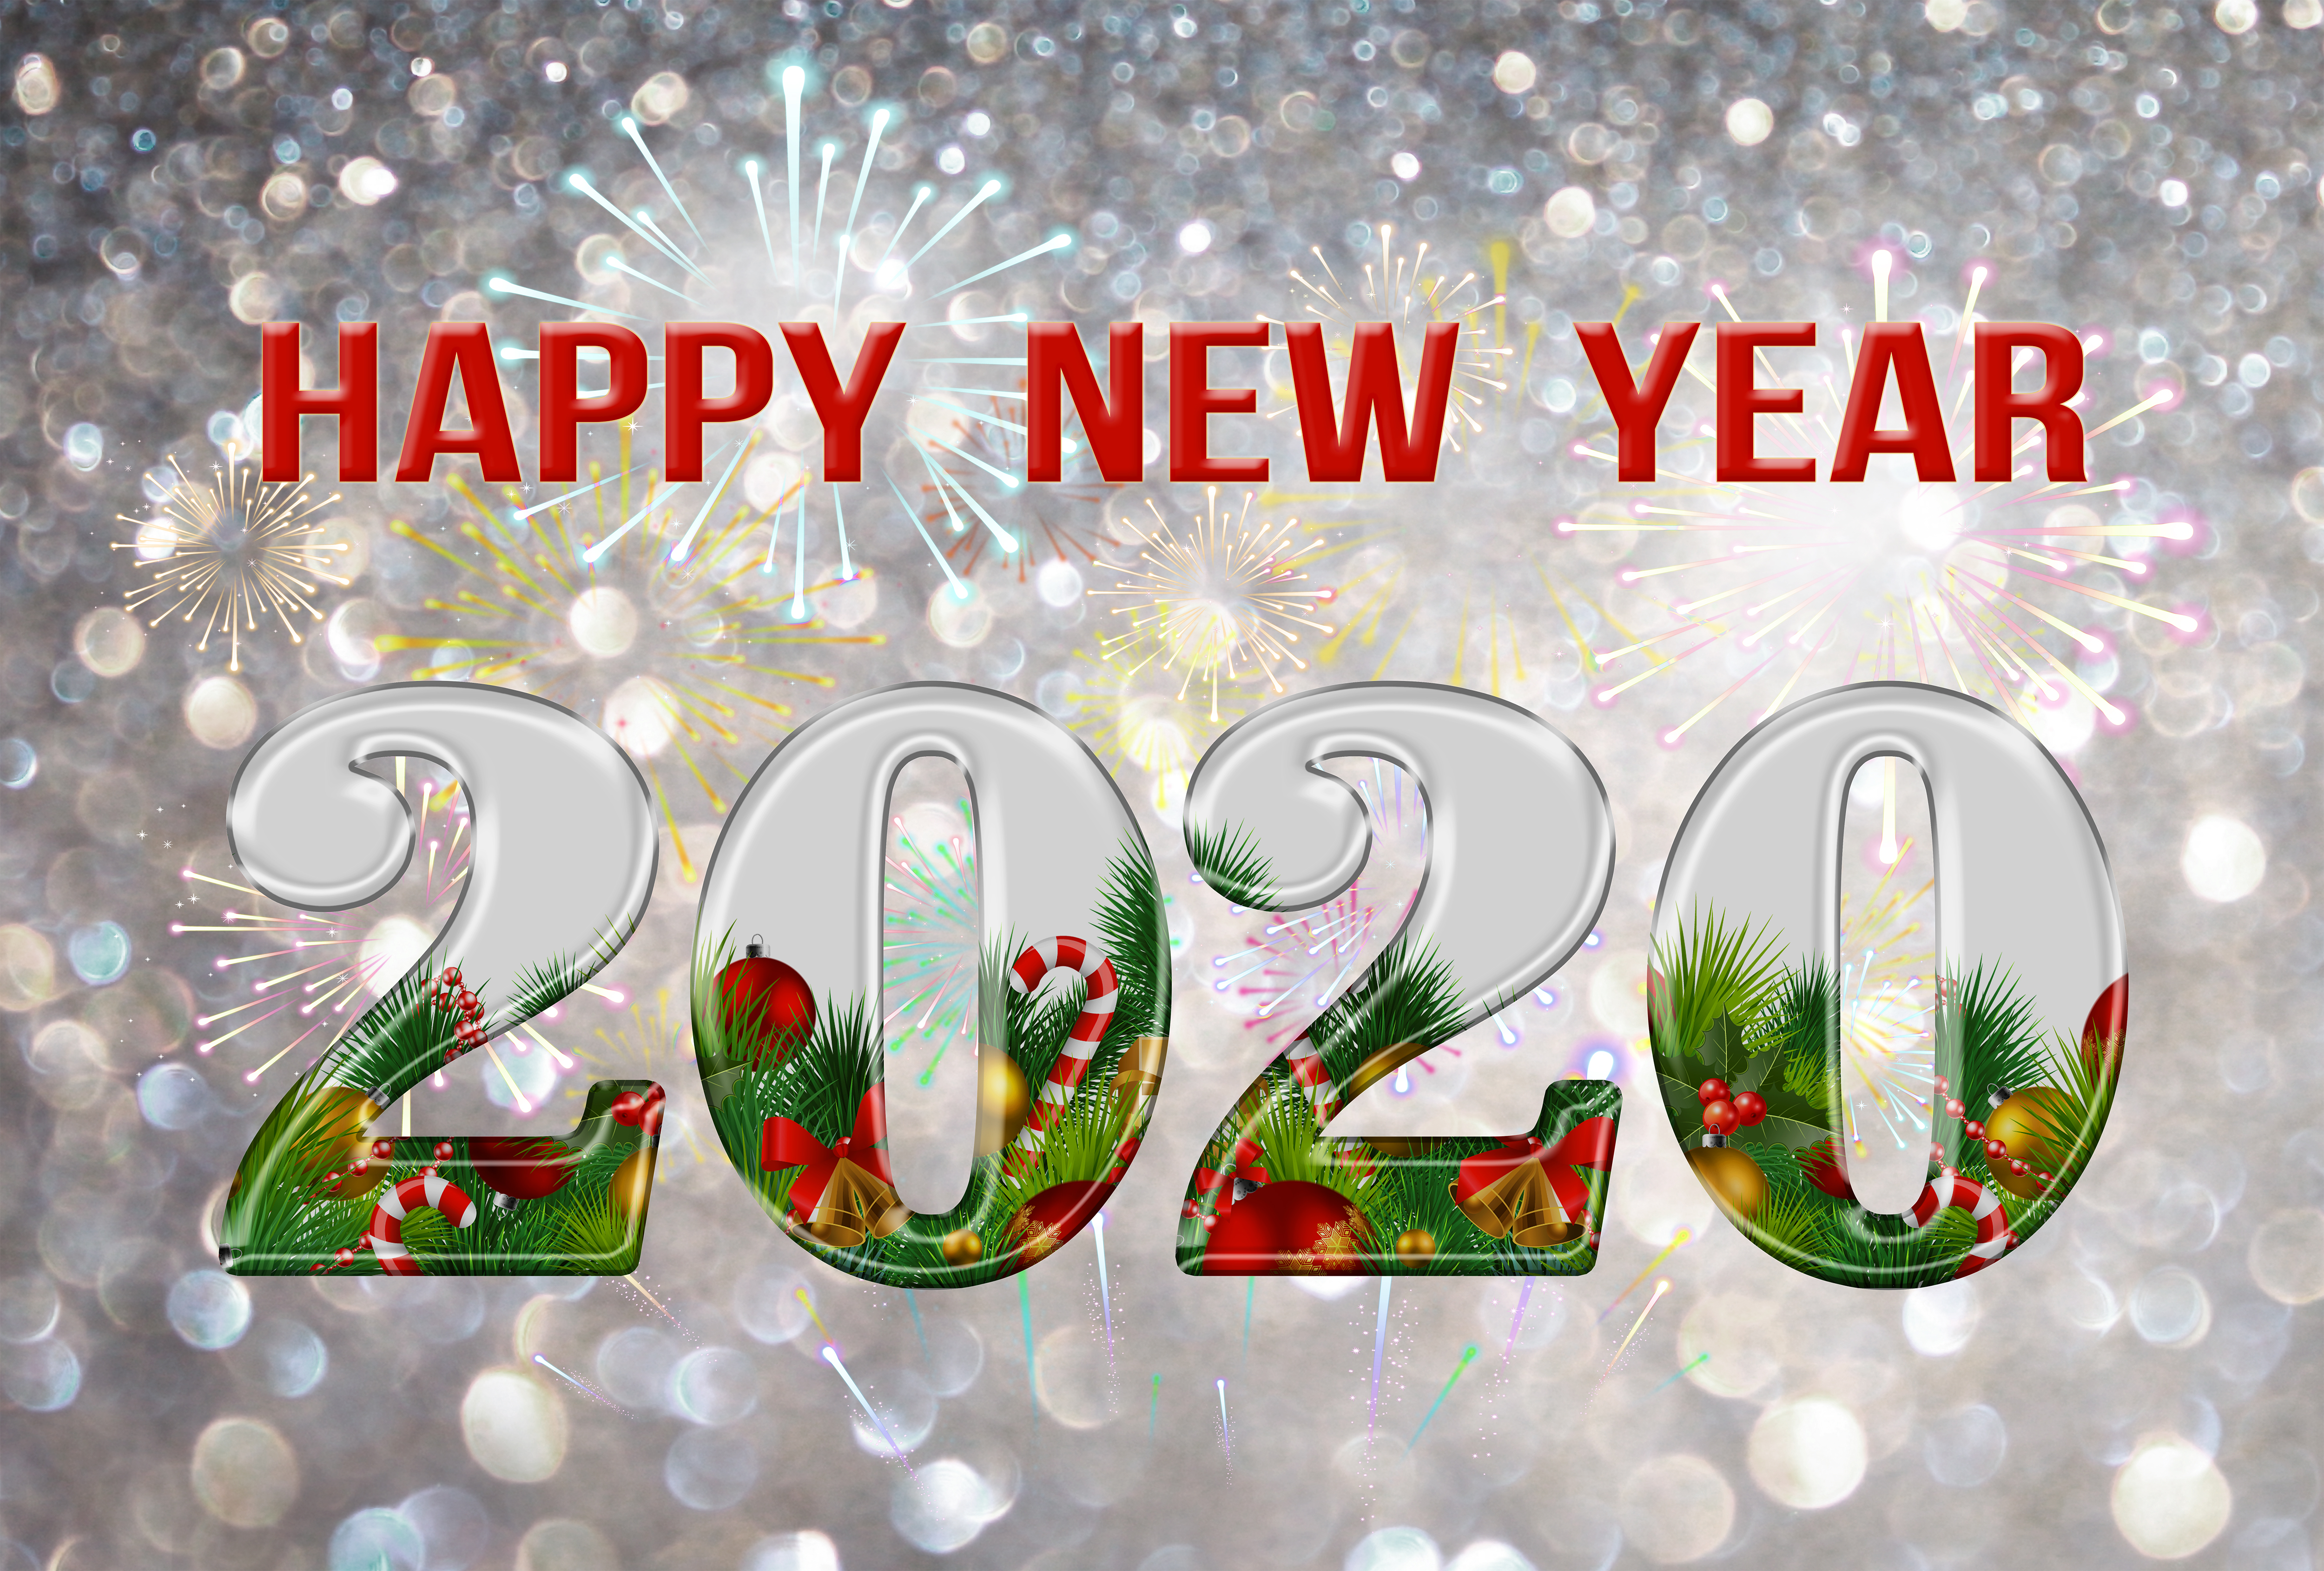 Happy New Year 2020 Background | Gallery Yopriceville ...